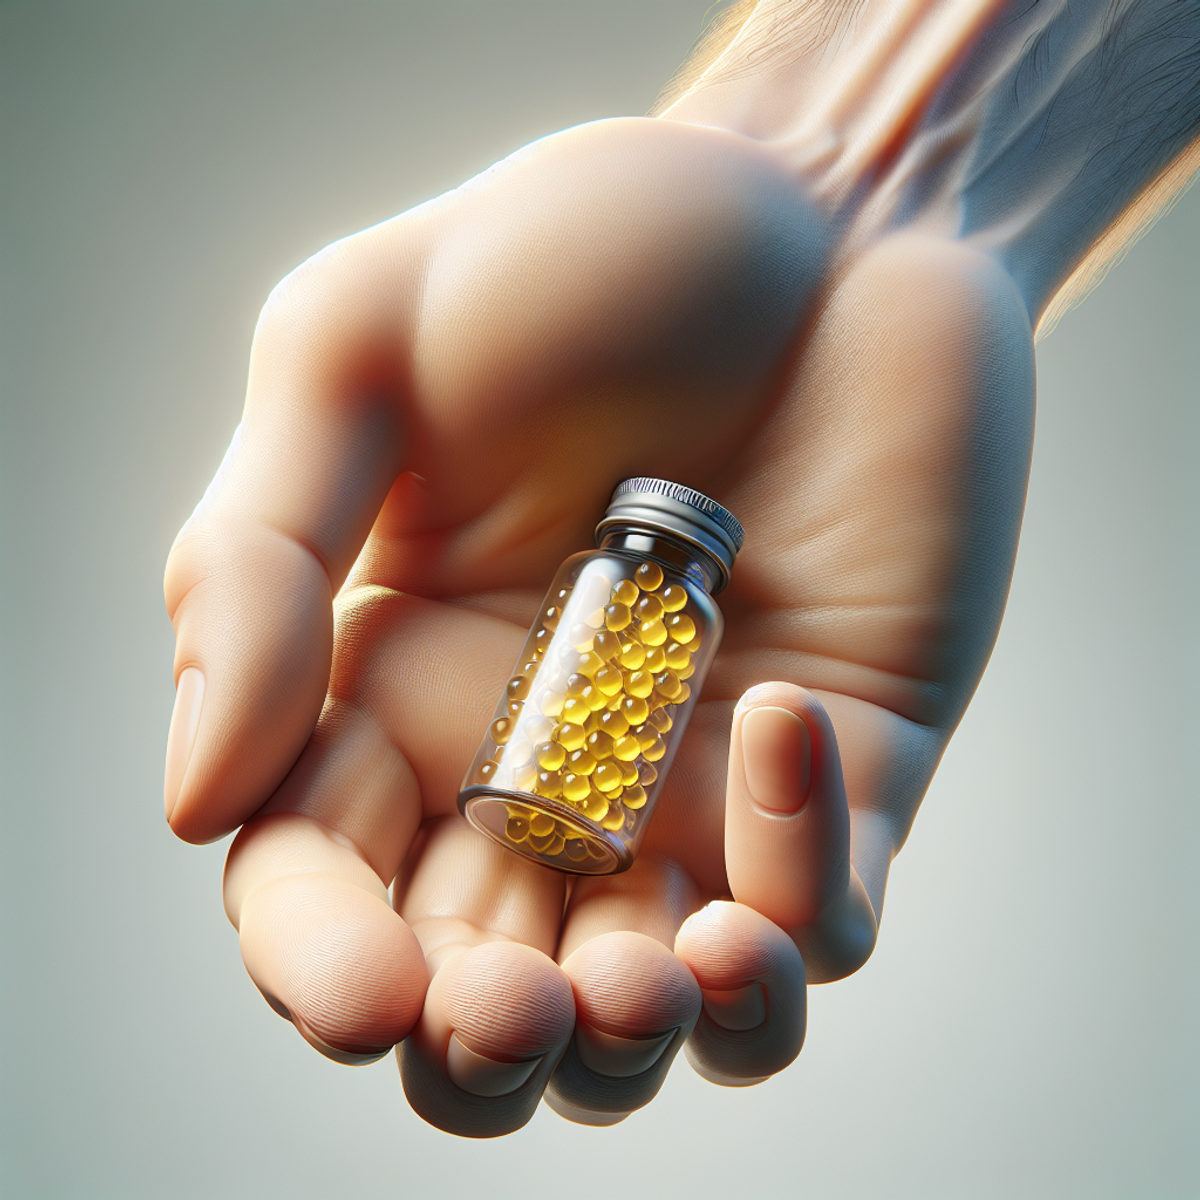 Close-up of a hand holding a bottle of Vitamin D3 supplements